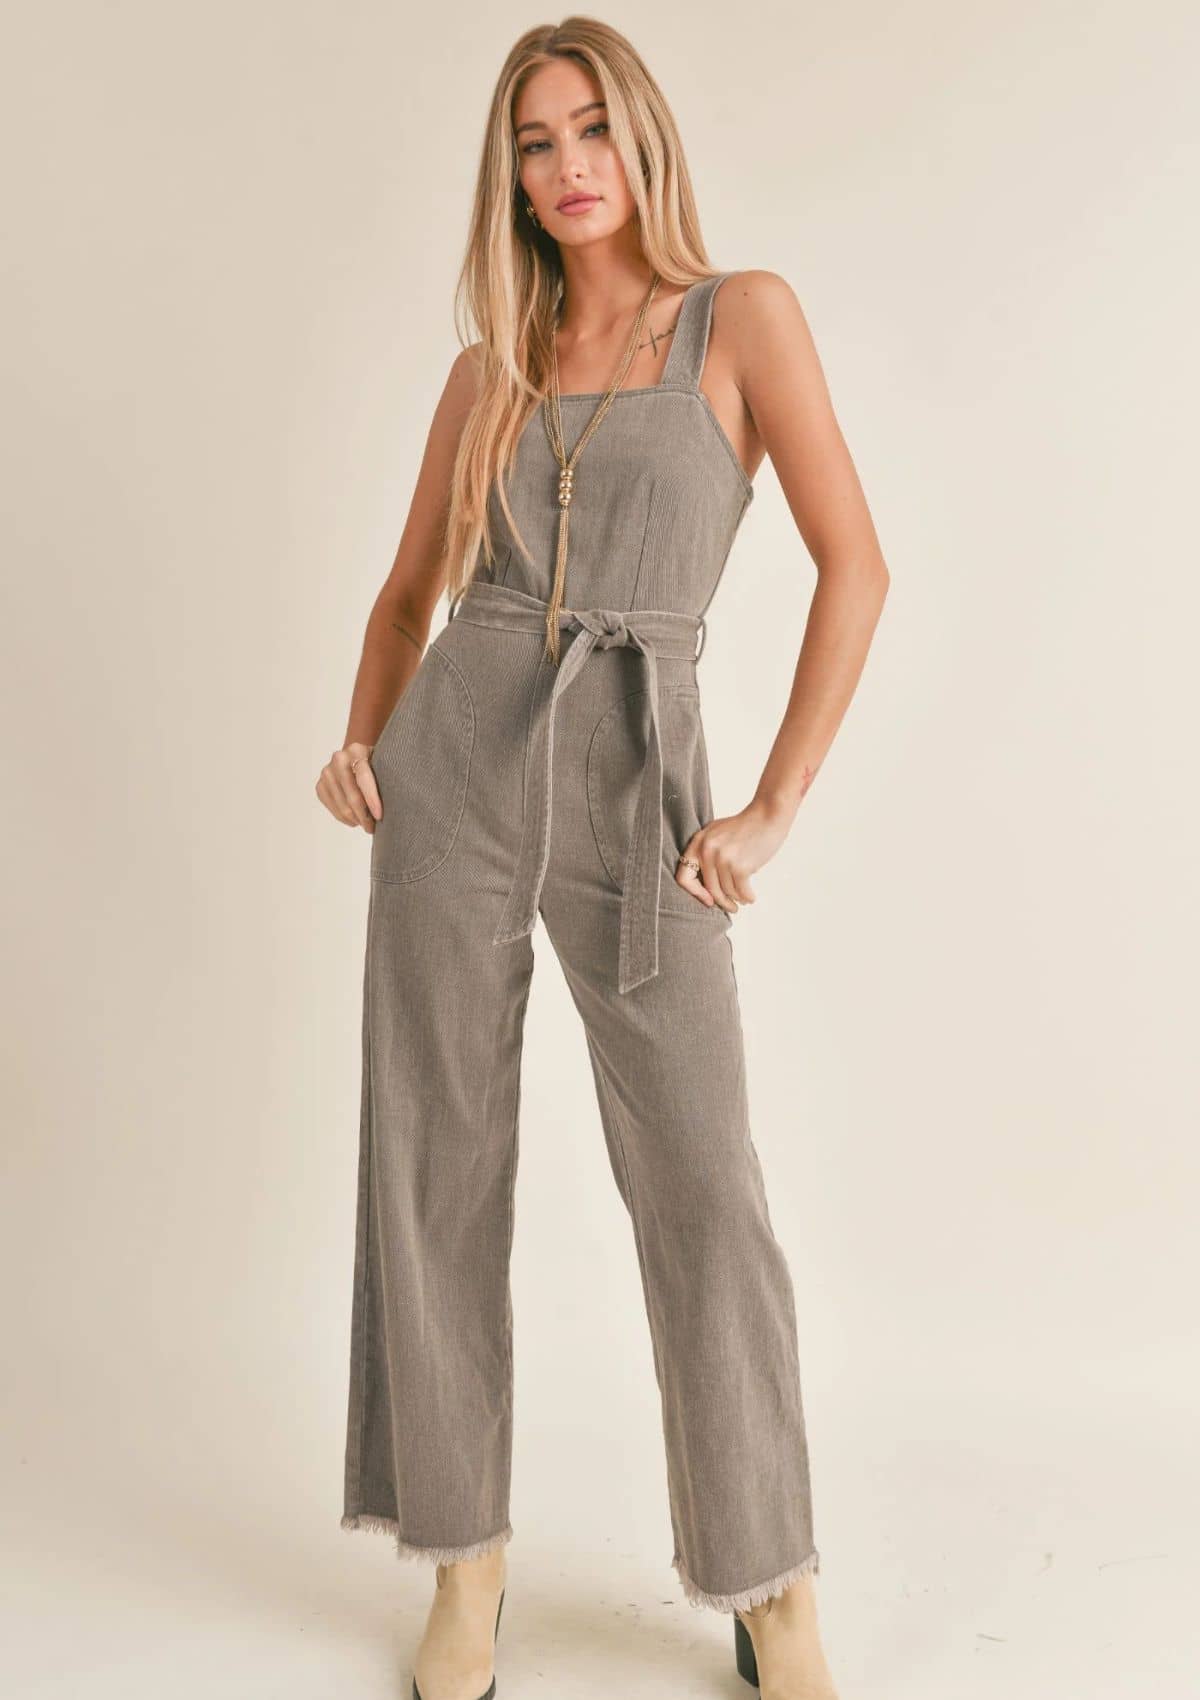 Gia Belted Washed Denim Overall -Sage the Label- Ruby Jane-